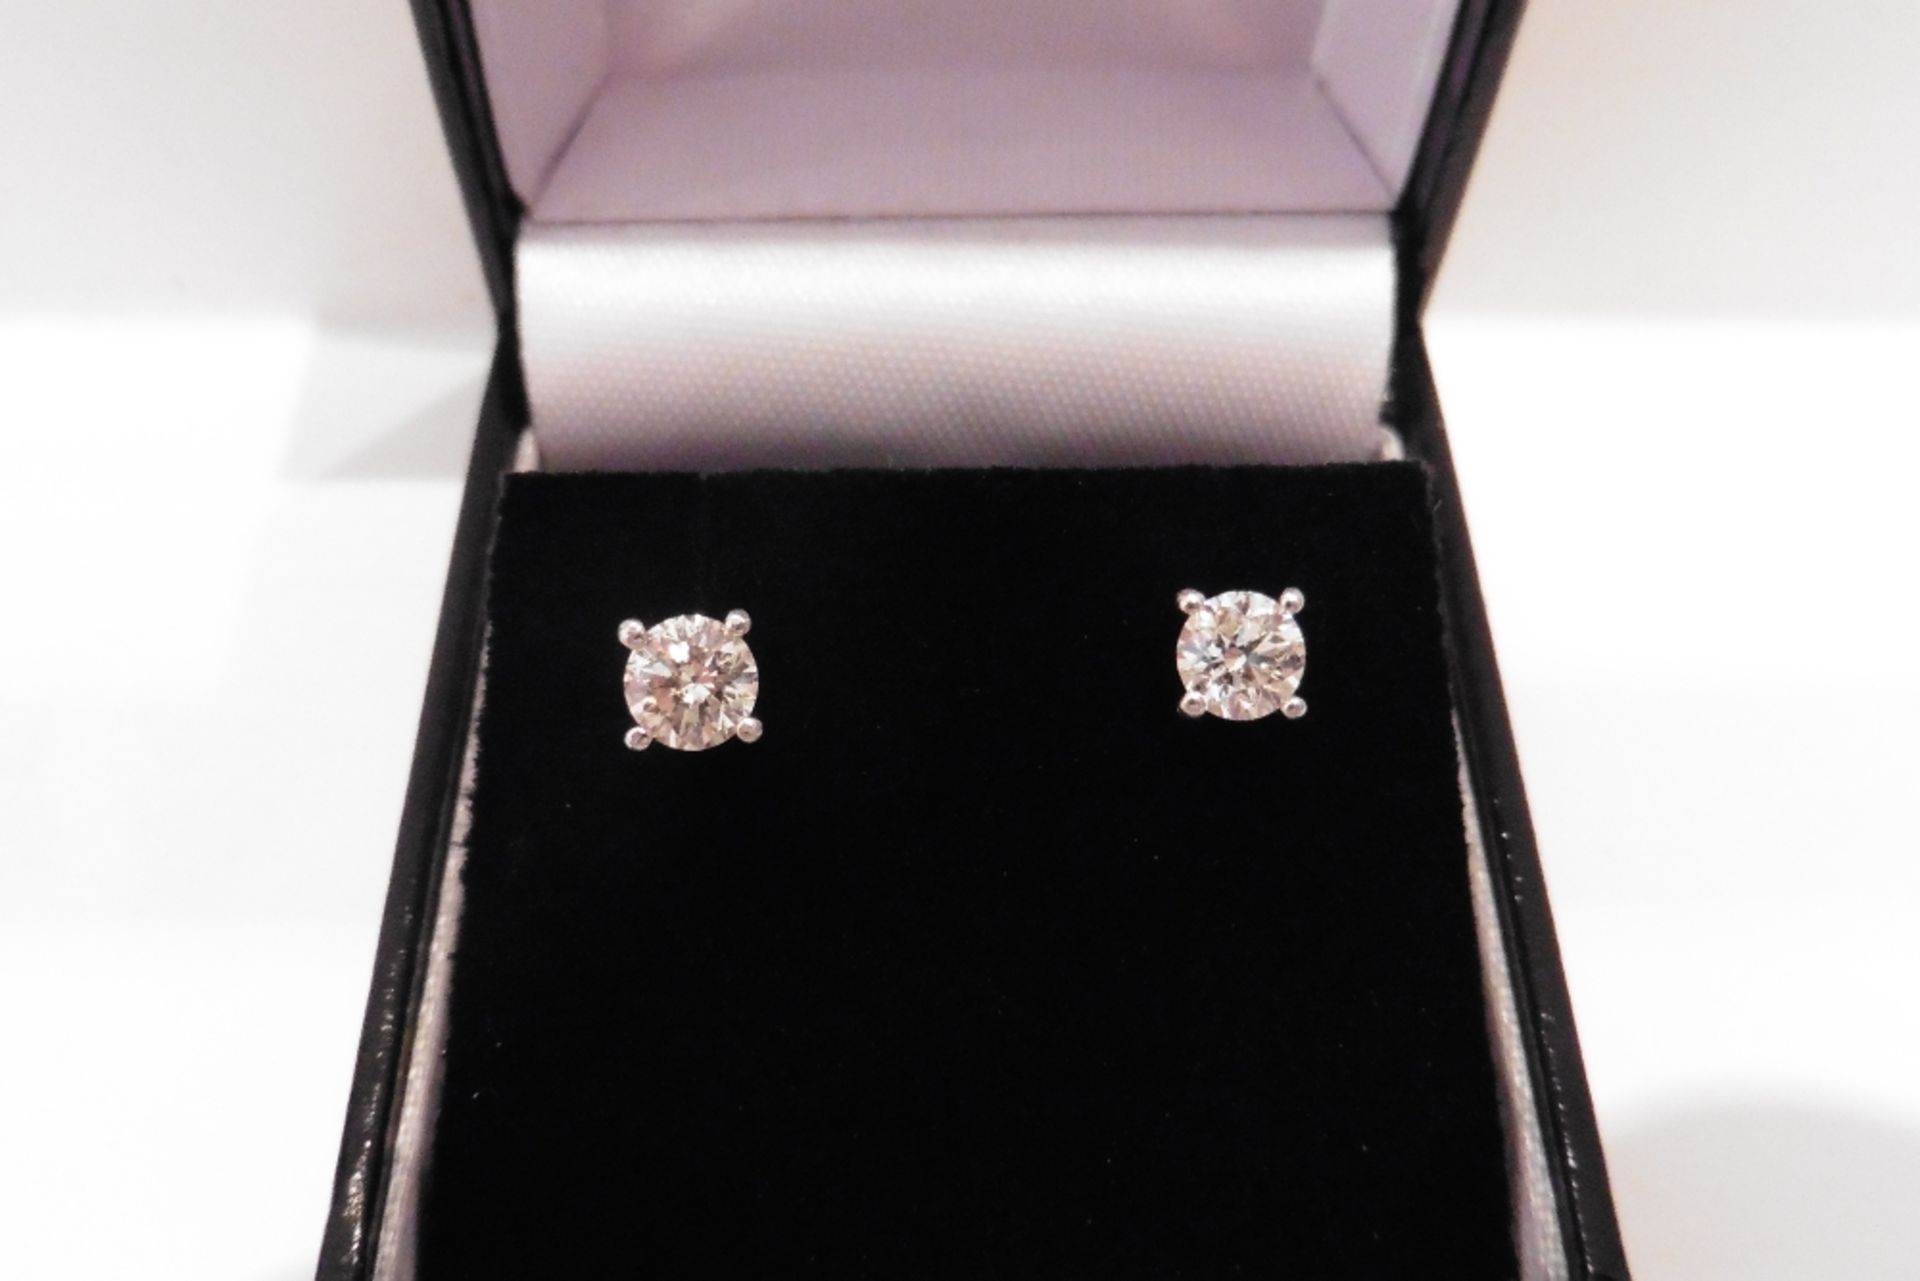 Pair of solitaire stud earrings each set with a russian cut diamond weighing a total of 0.34ct. Grad